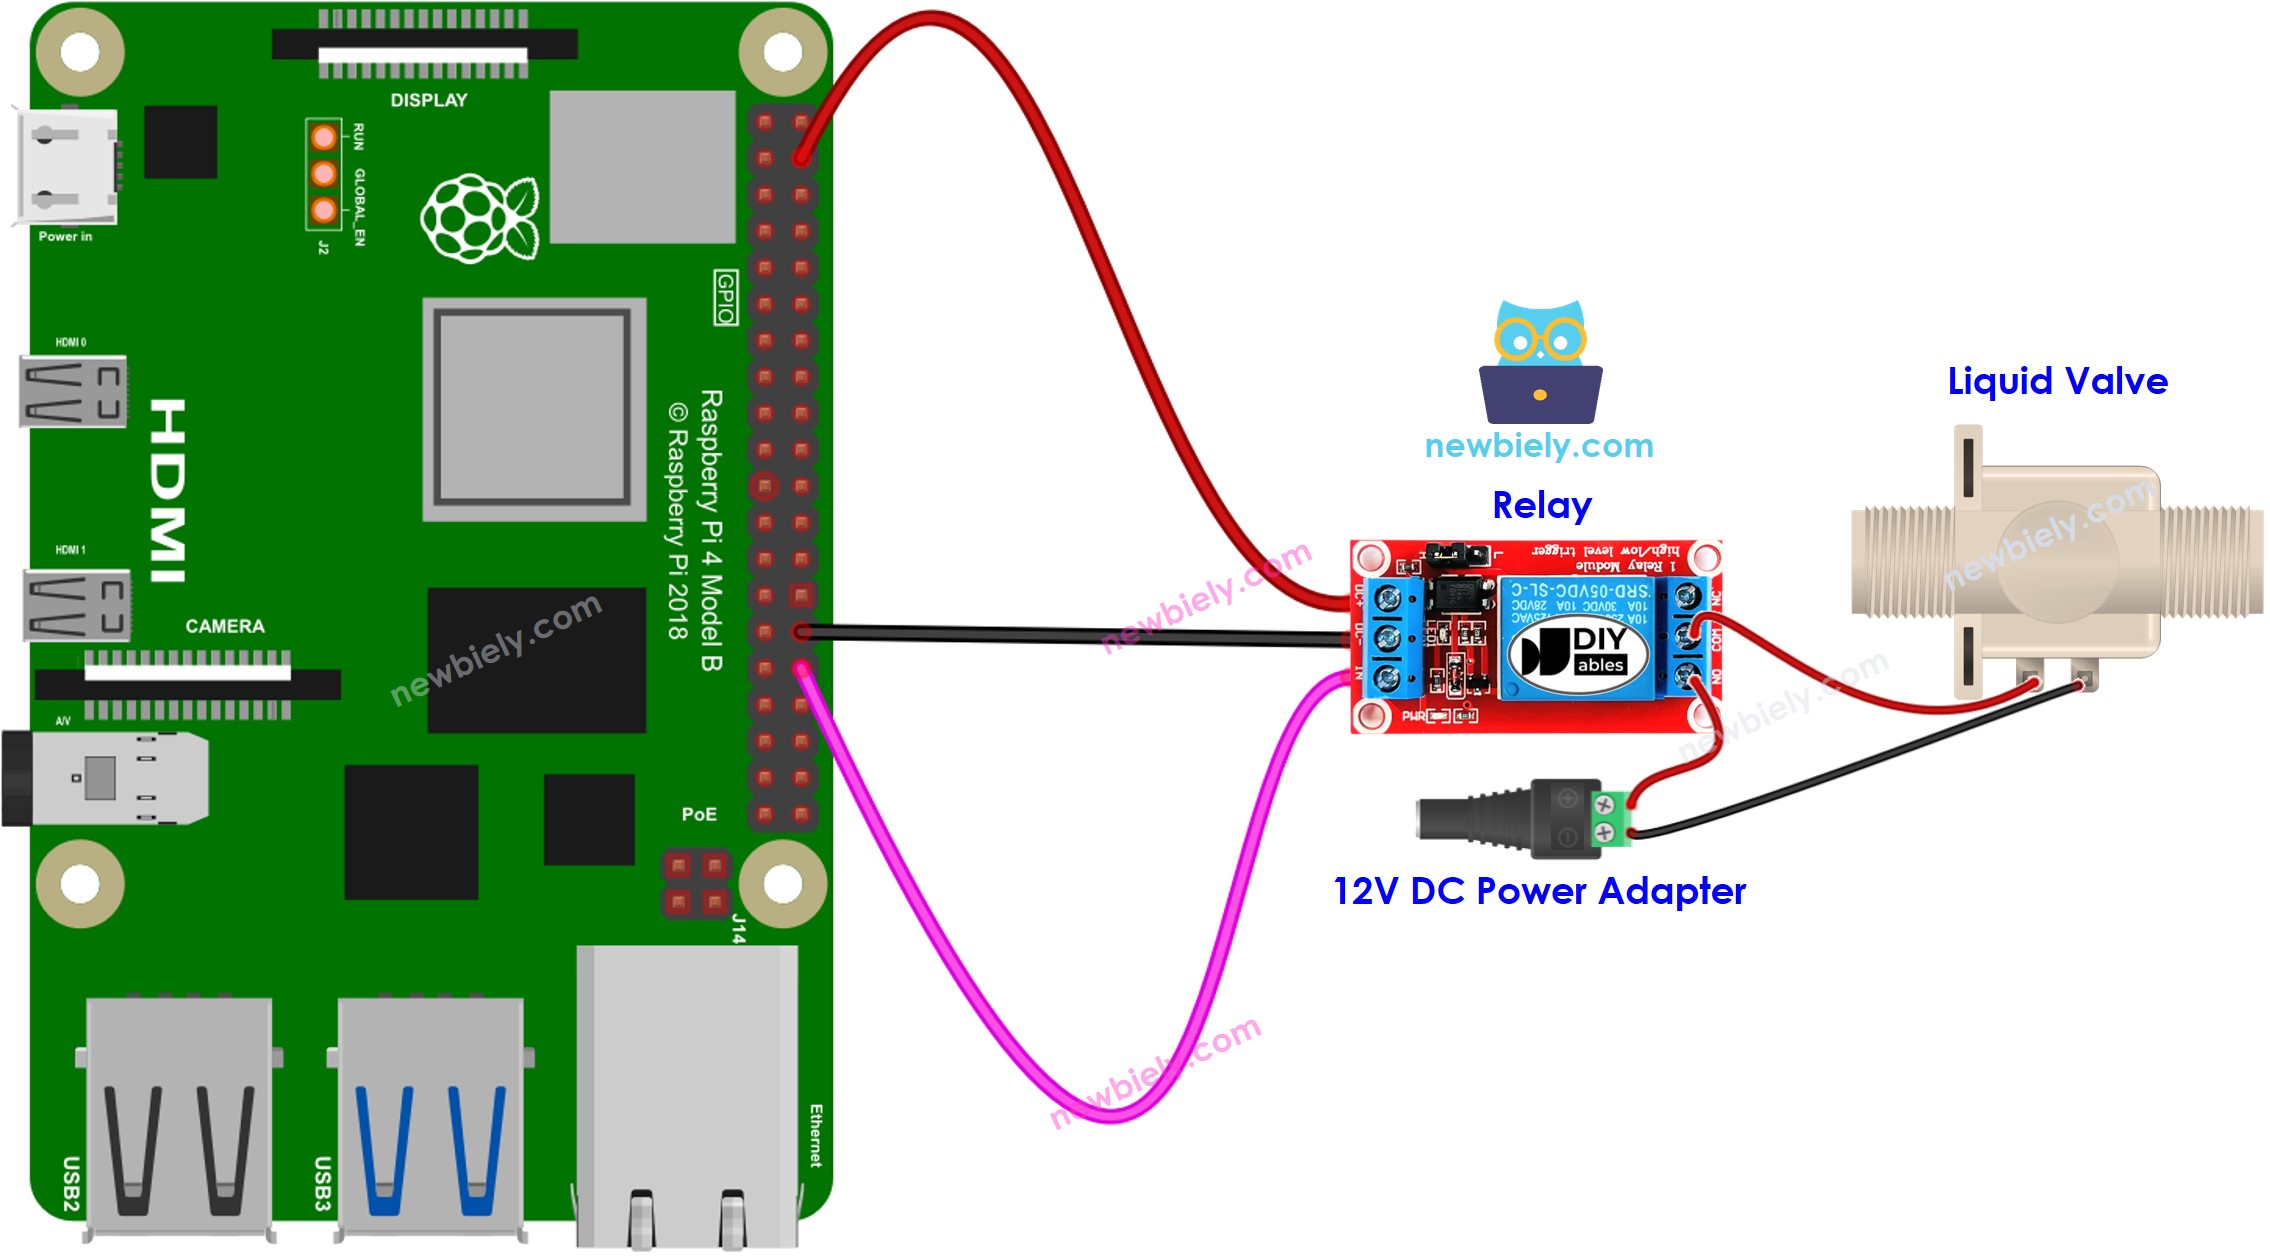 The wiring diagram between Raspberry Pi and water valve